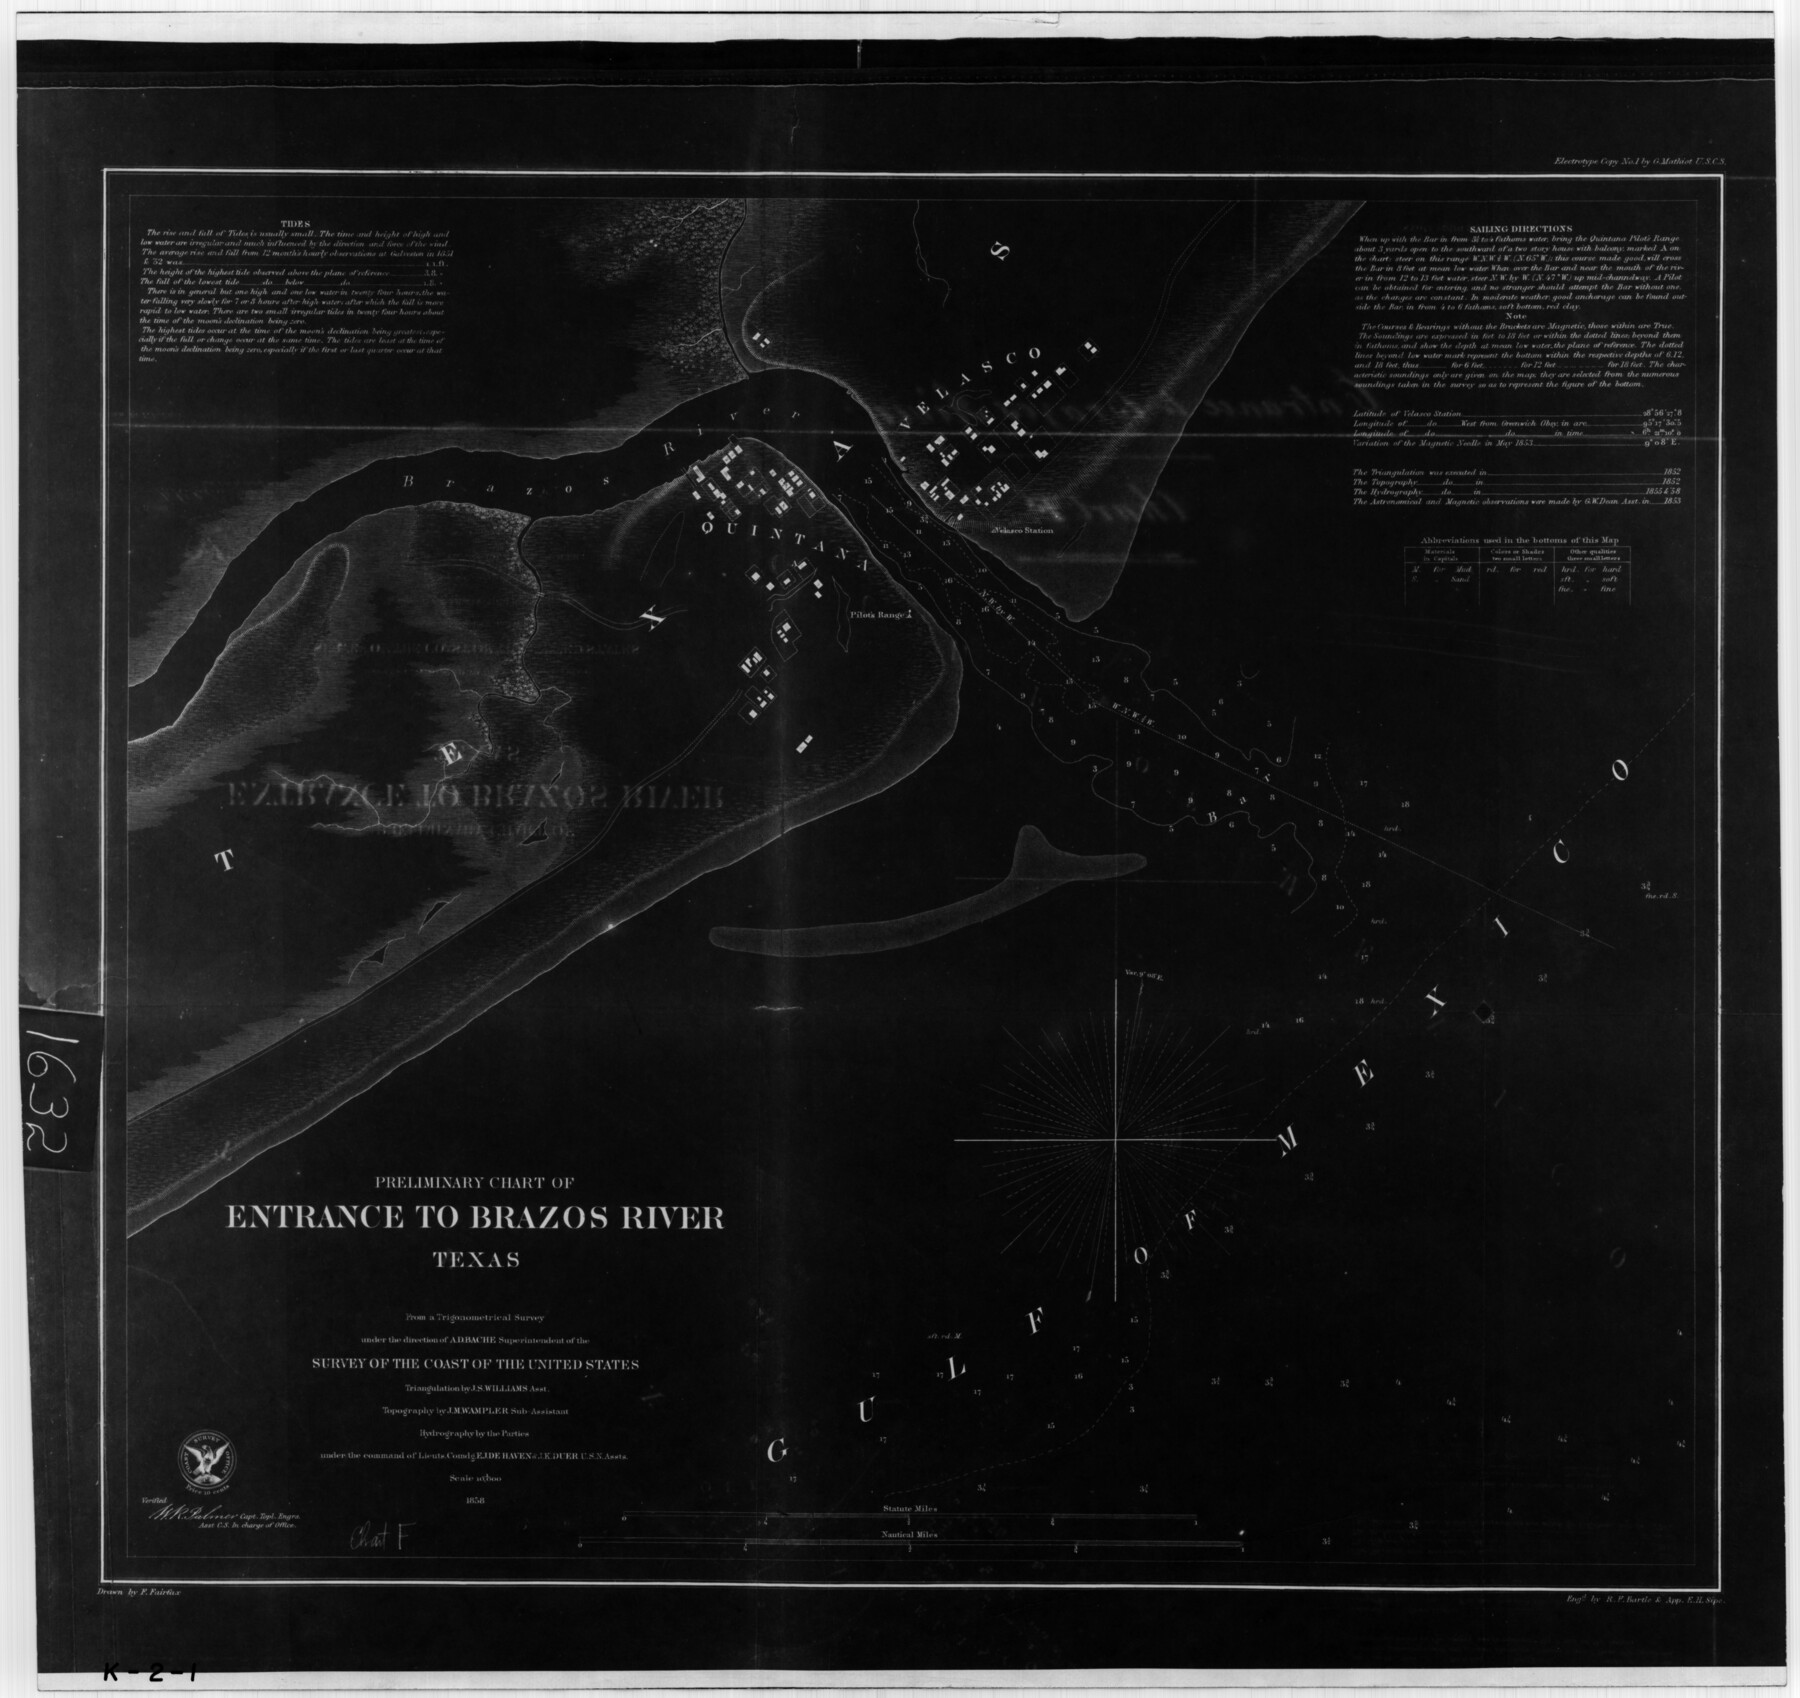 69973, Preliminary Chart of Entrance to Brazos River, Texas, General Map Collection